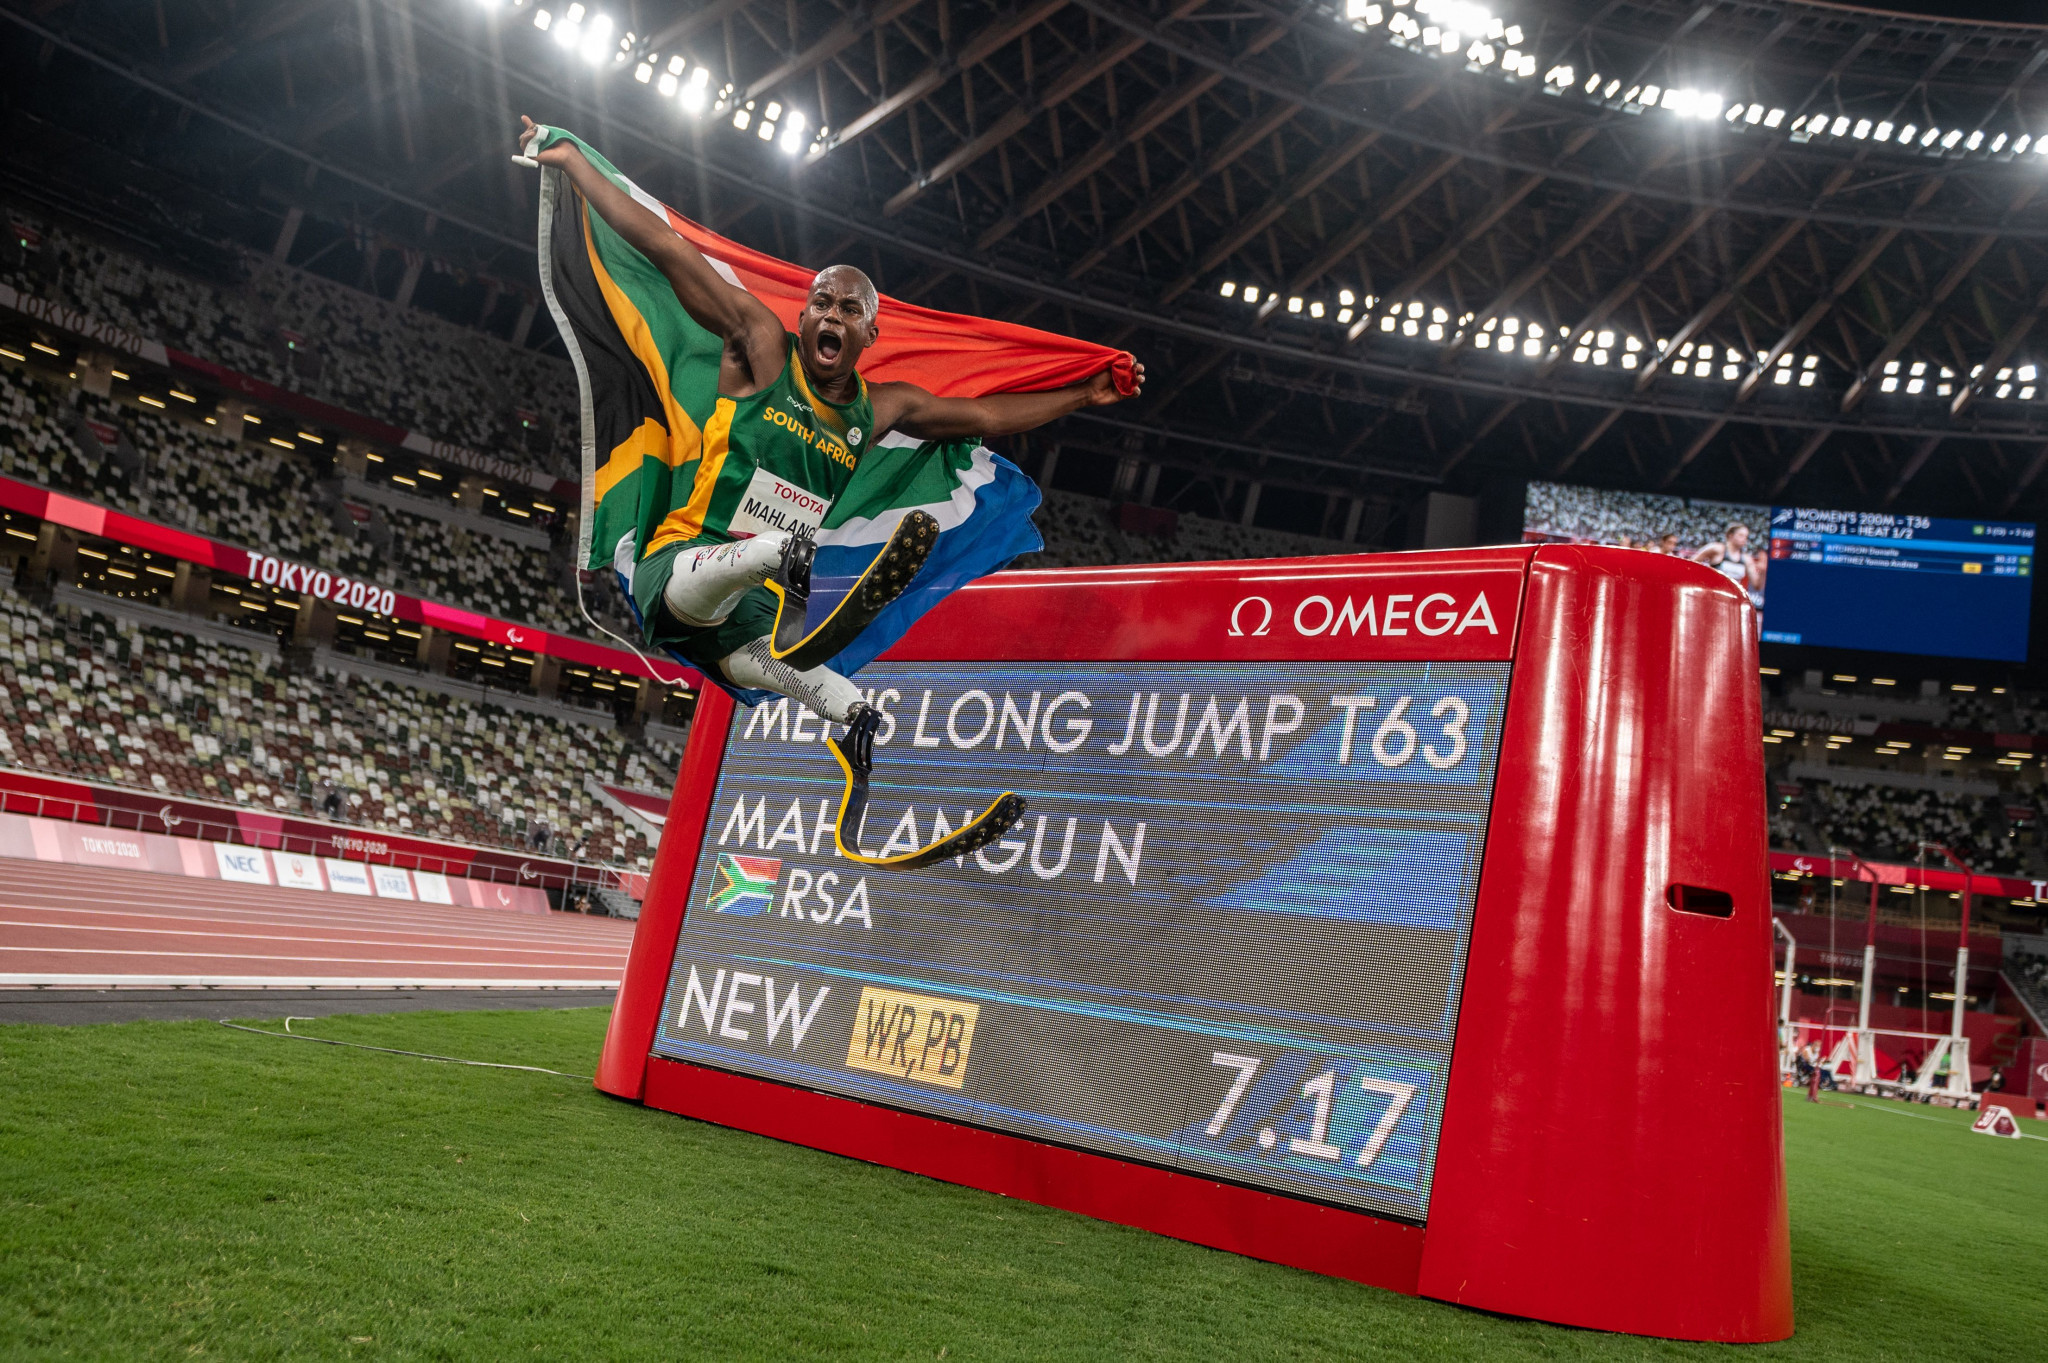 Ntando Mahlangu triumphed in the men's long jump T63 event  ©Getty Images